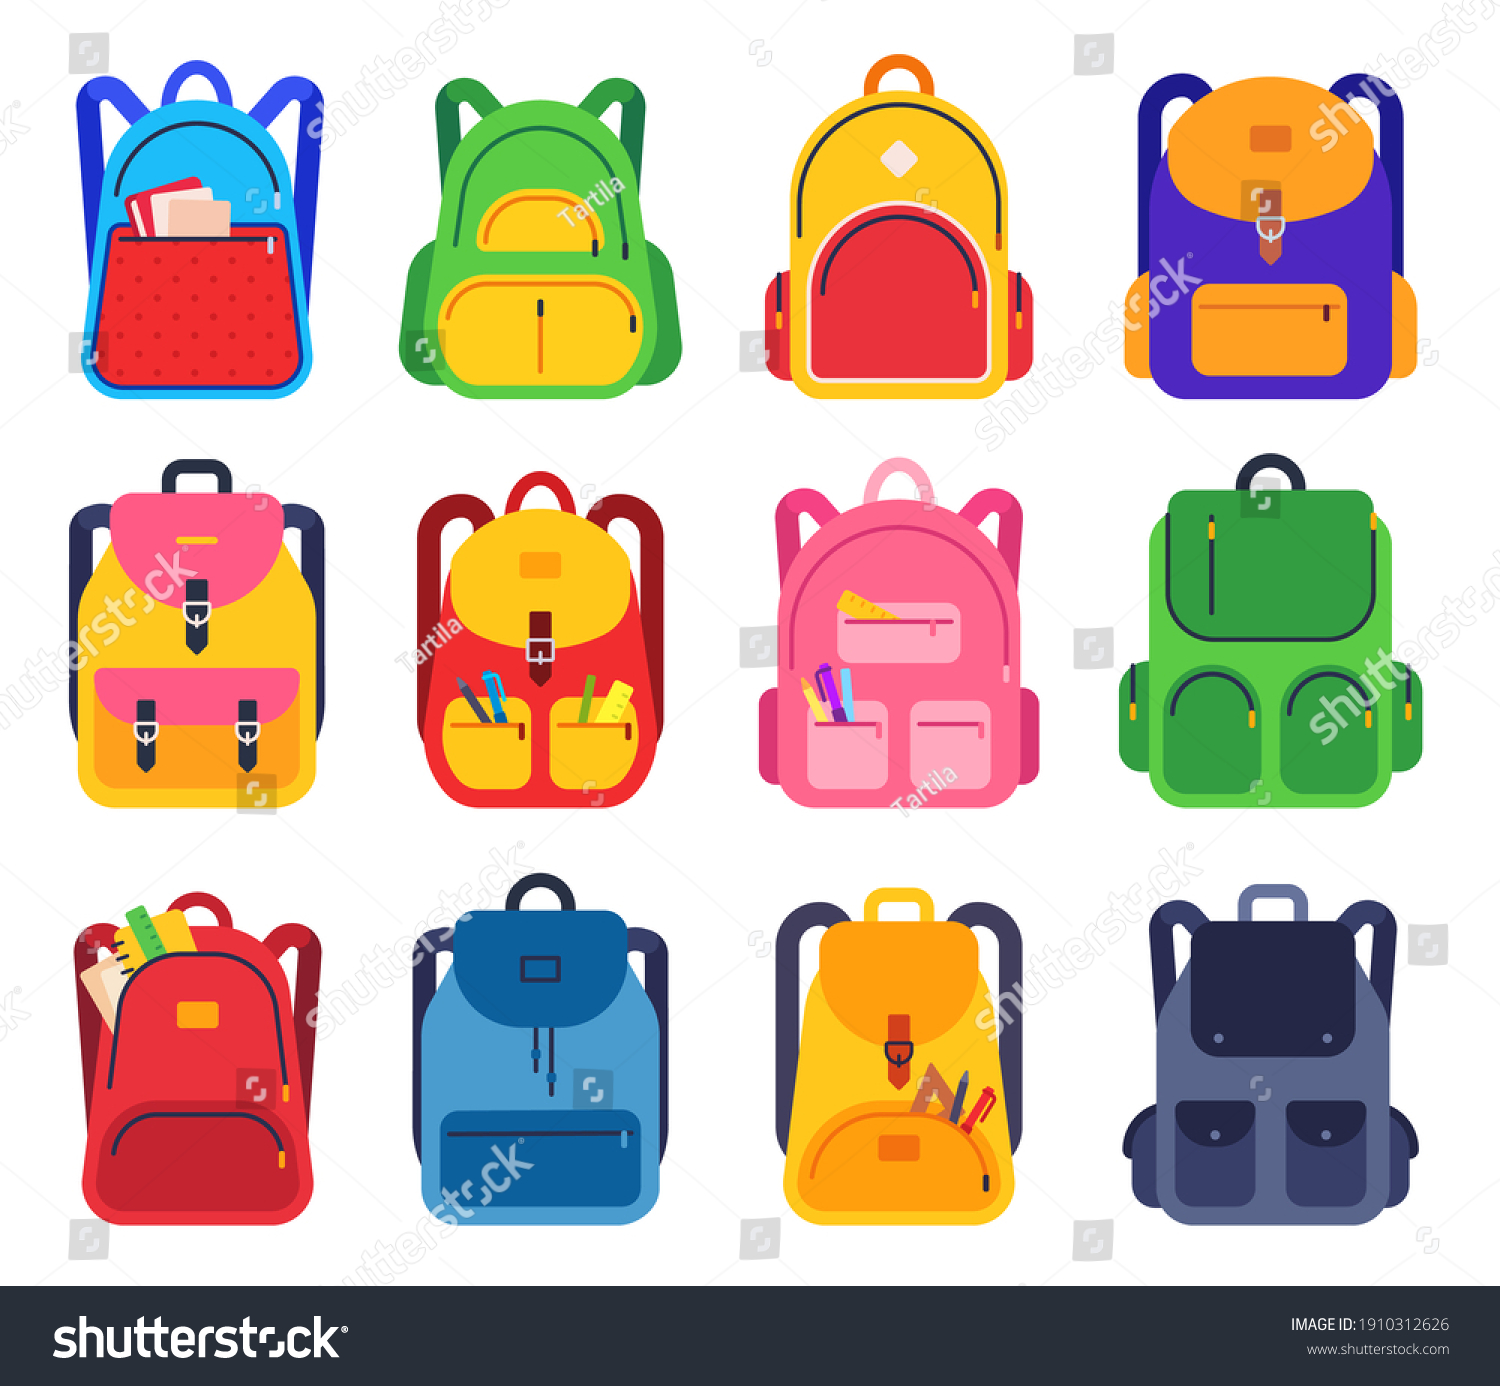 Back-packing Images, Stock Photos & Vectors | Shutterstock